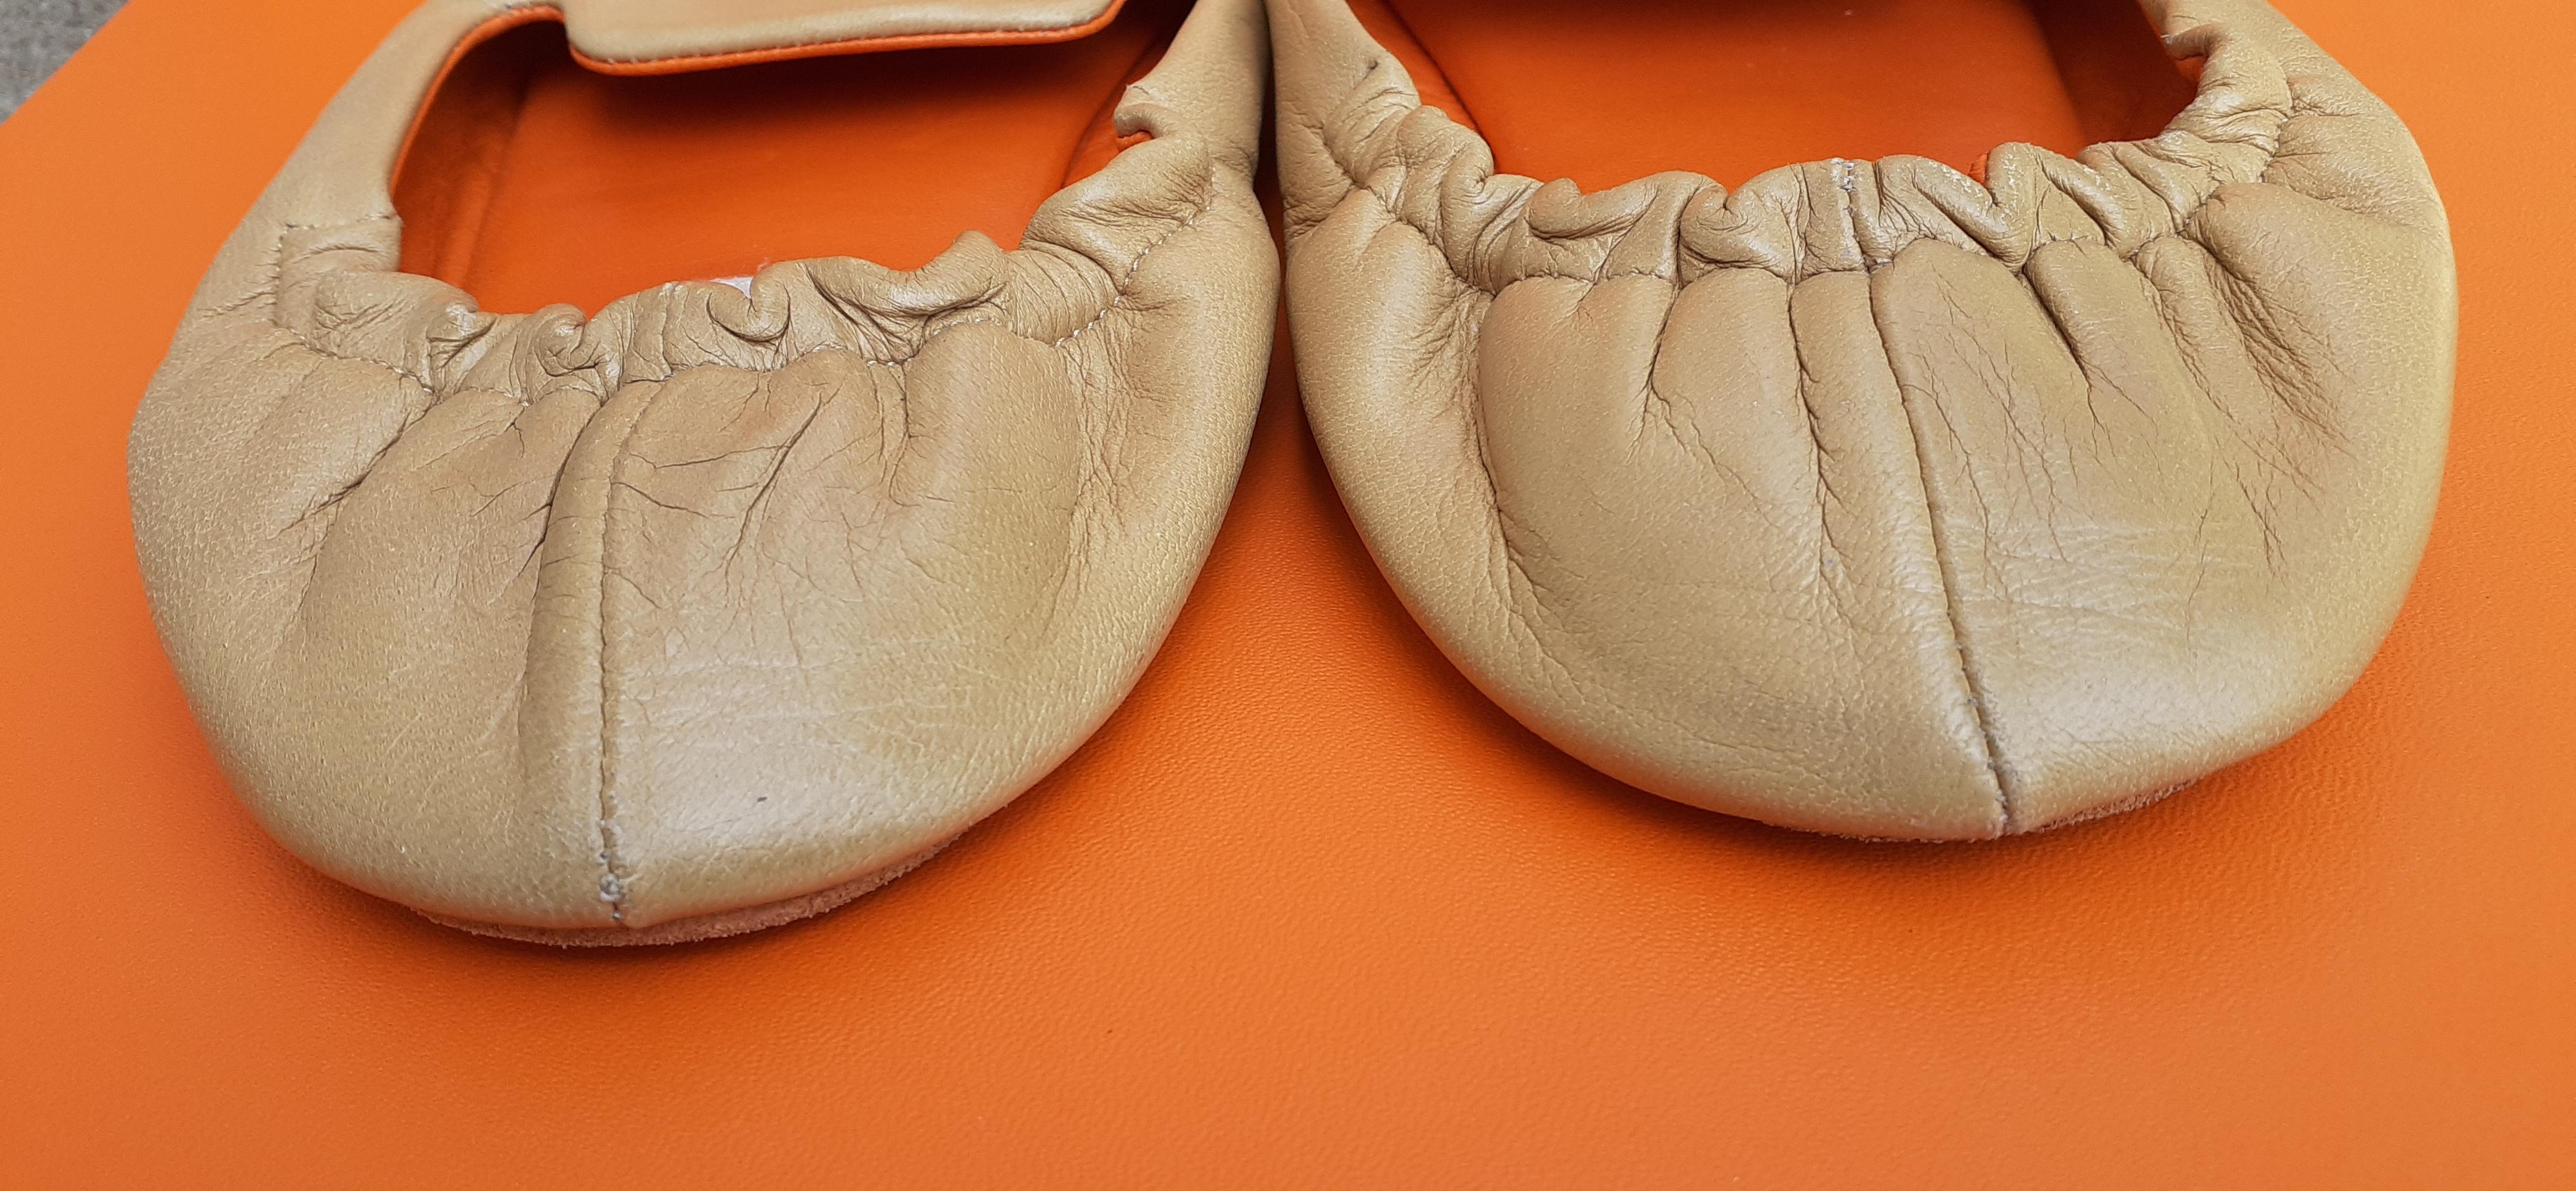 Hermès Leather Shoes Slippers Size 37 FR  4